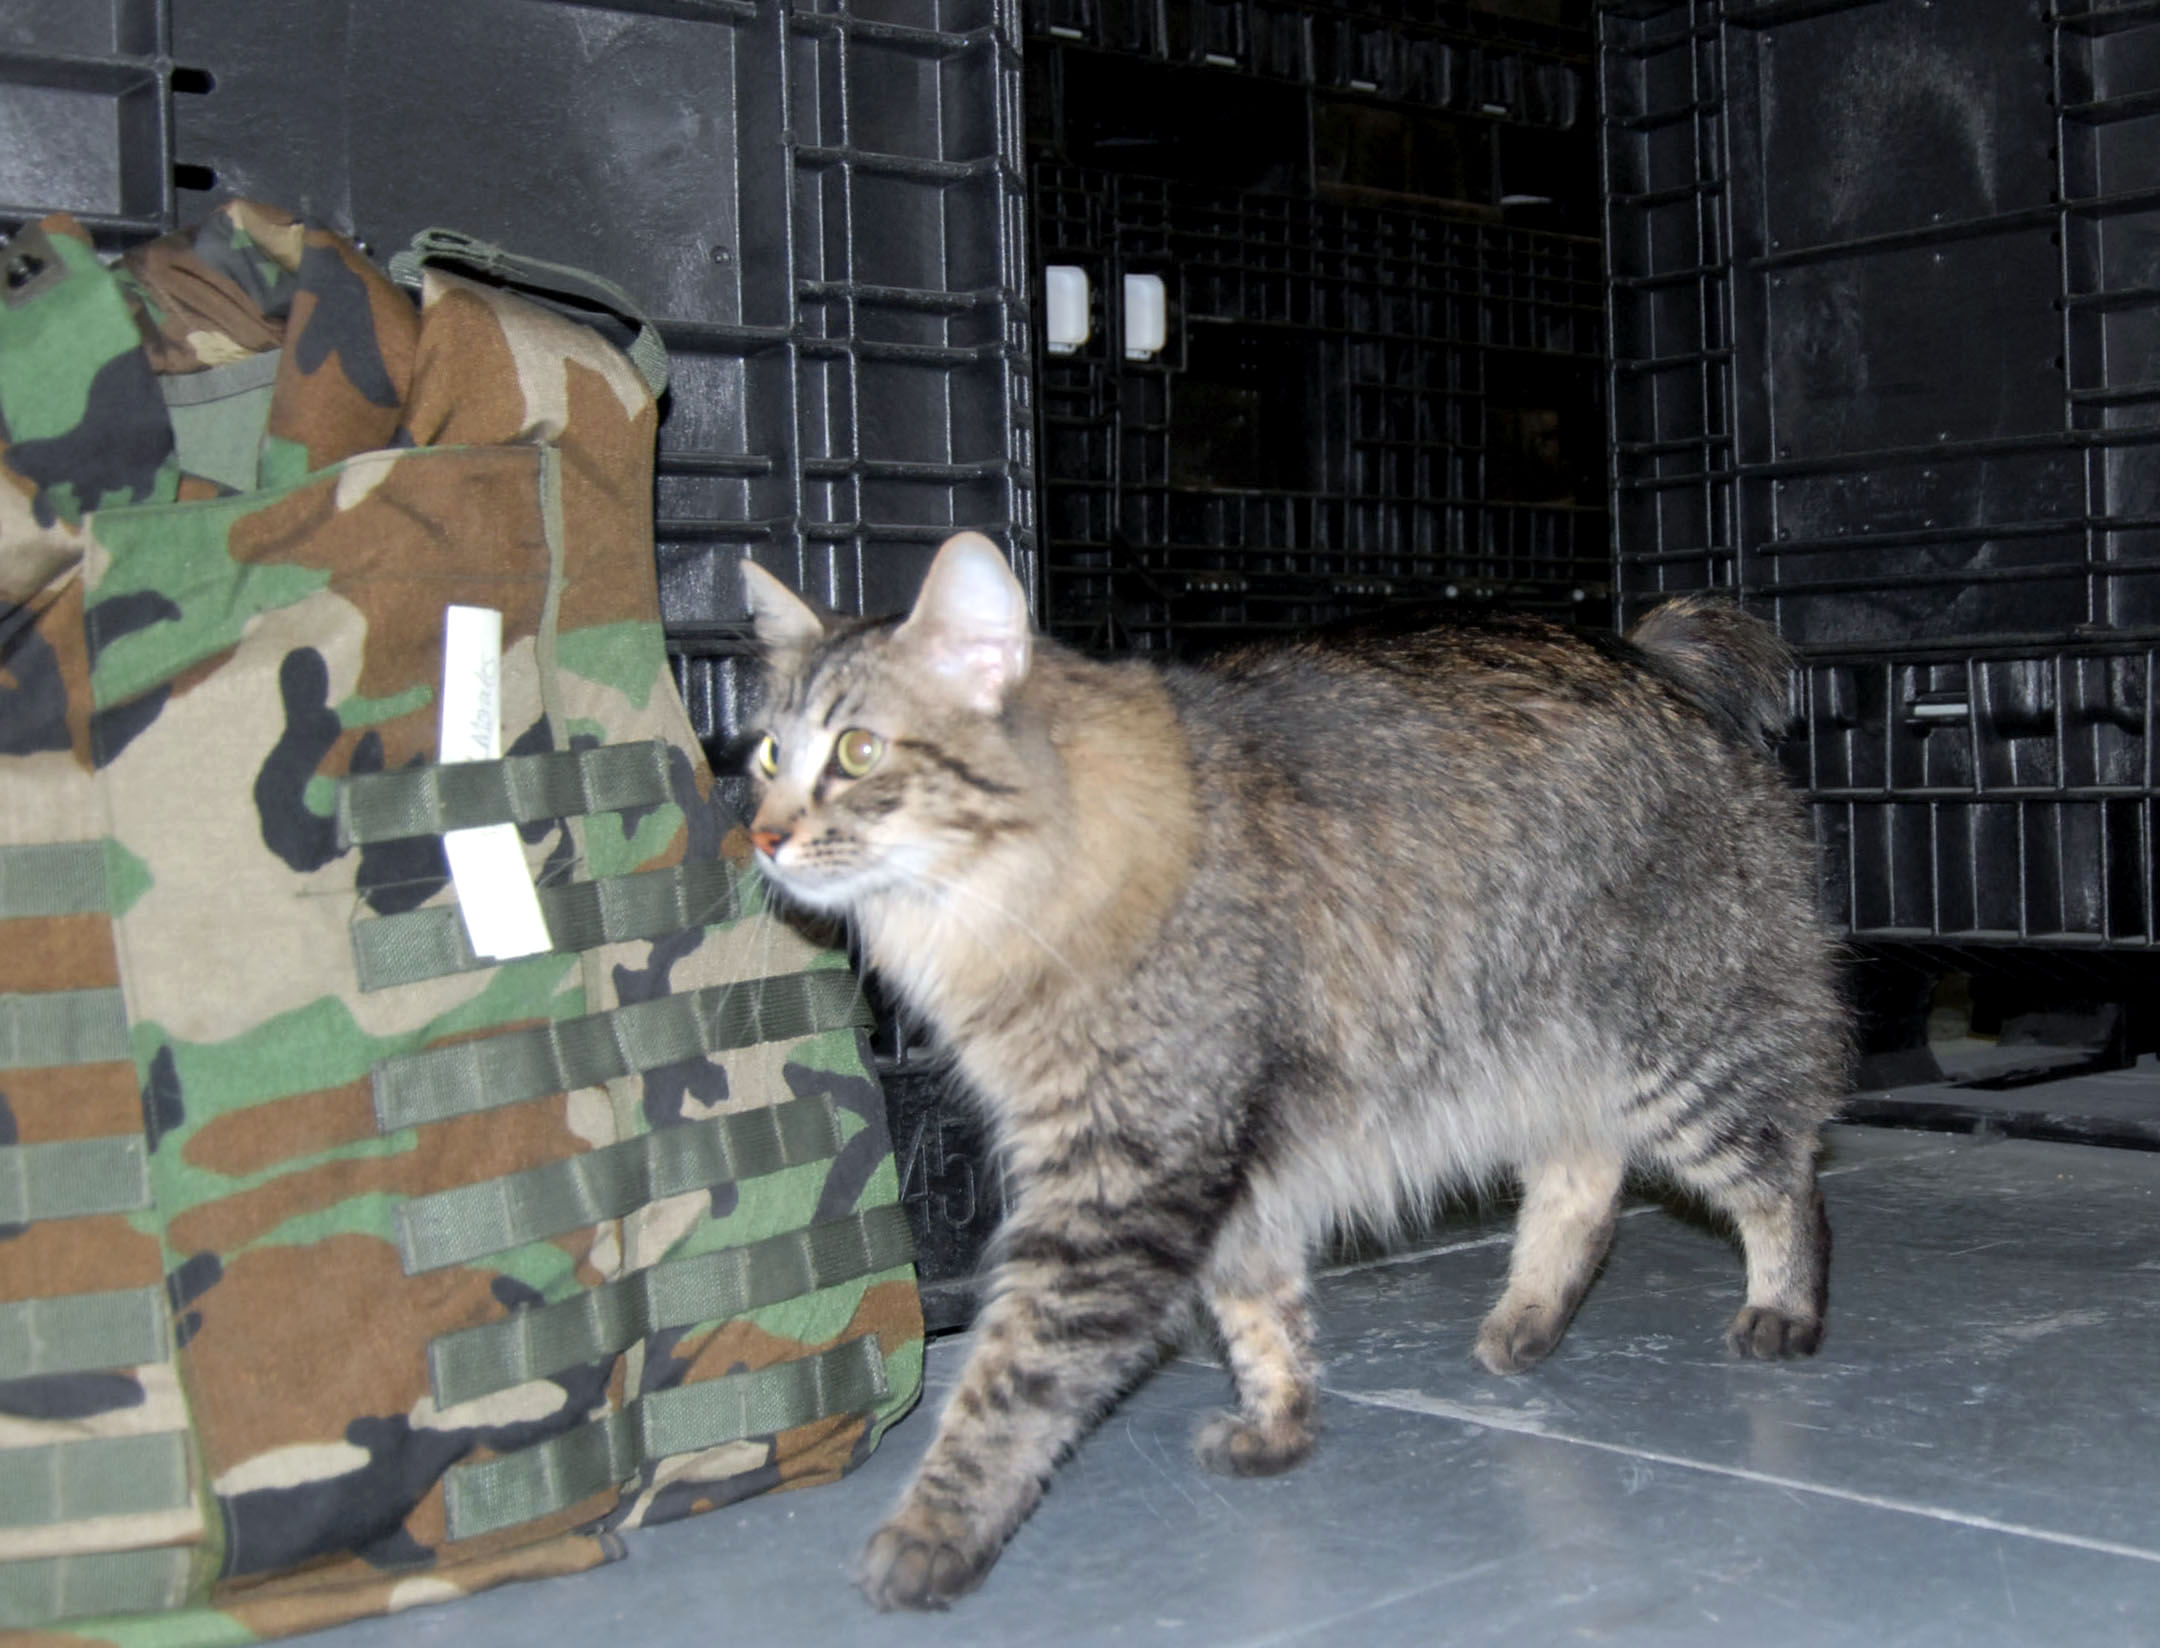 Supply unit uses military  working cat  to control 